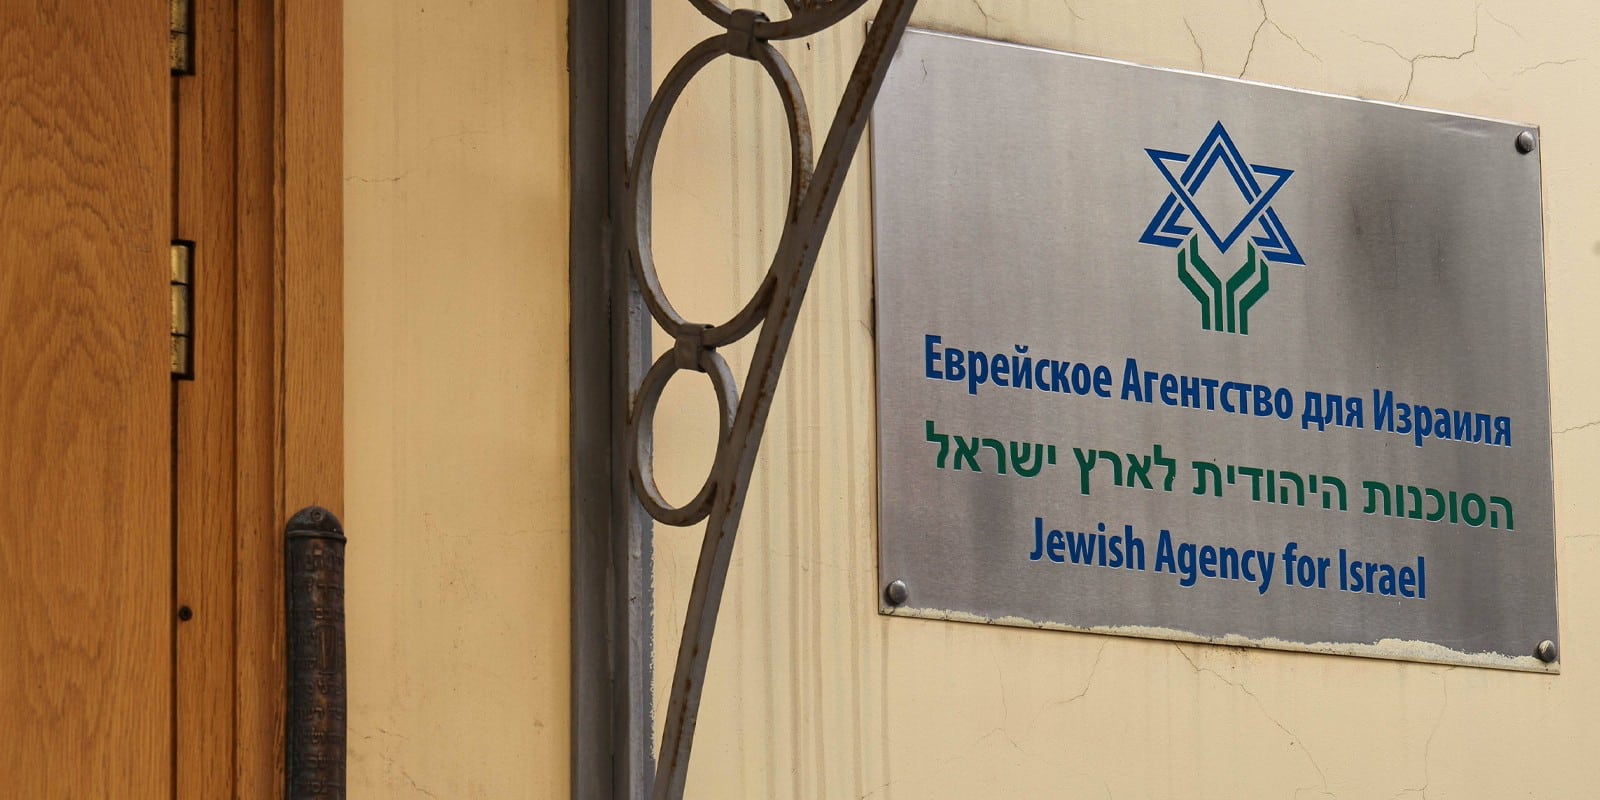 The entrance to the Jewish Agency for Israel in Moscow, Russia